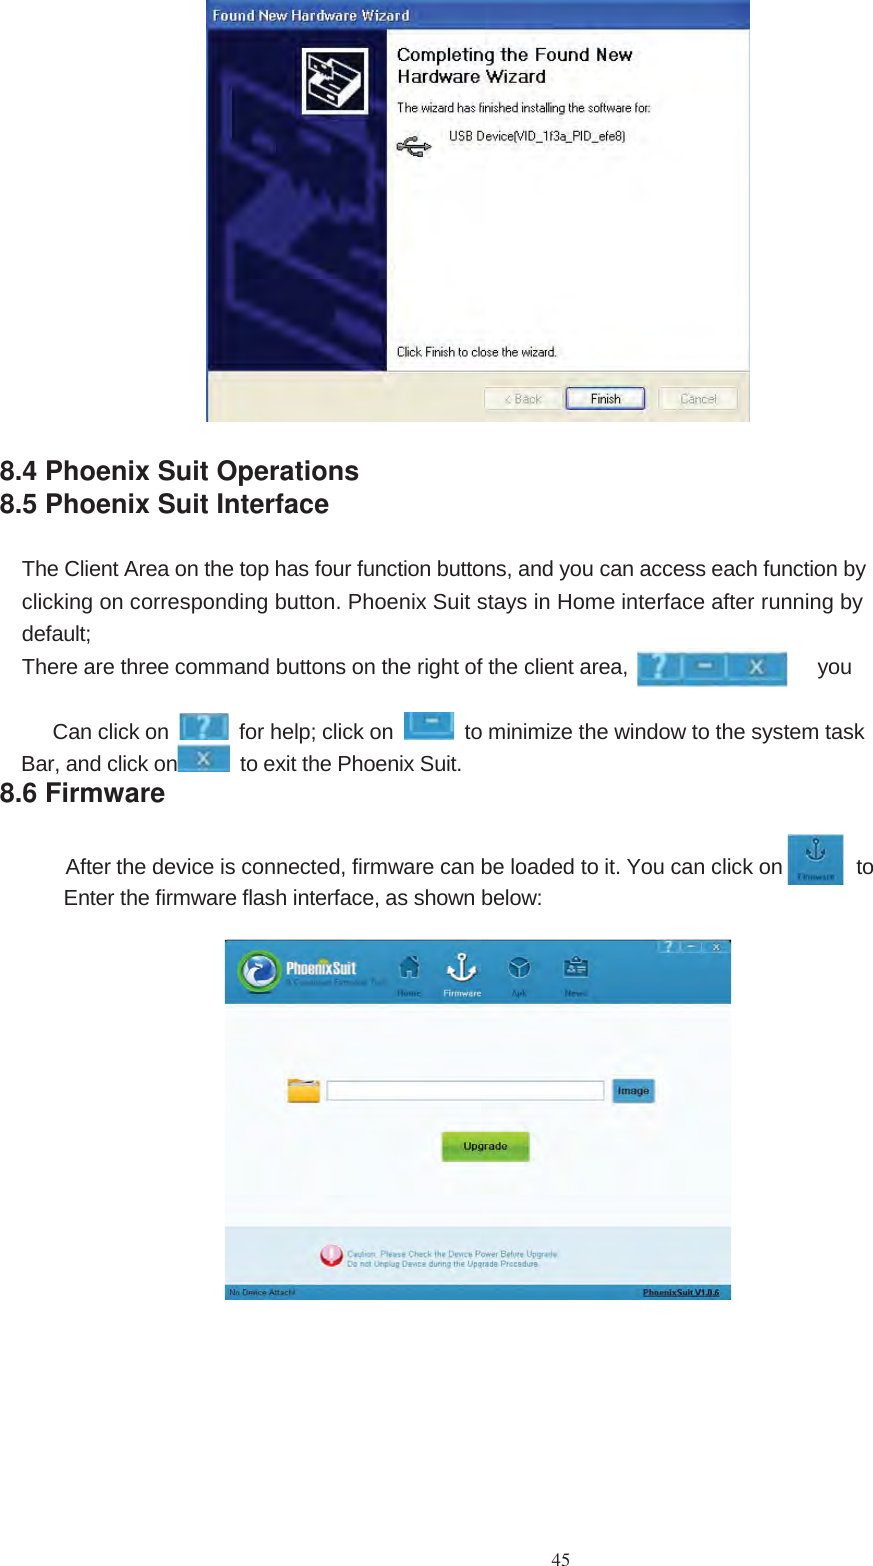 458.4 Phoenix Suit Operations8.5 Phoenix Suit InterfaceThe Client Area on the top has four function buttons, and you can access each function byclicking on corresponding button. Phoenix Suit stays in Home interface after running bydefault;There are three command buttons on the right of the client area, youCan click on for help; click on to minimize the window to the system taskBar, and click on to exit the Phoenix Suit.8.6 FirmwareAfter the device is connected, firmware can be loaded to it. You can click on toEnter the firmware flash interface, as shown below: